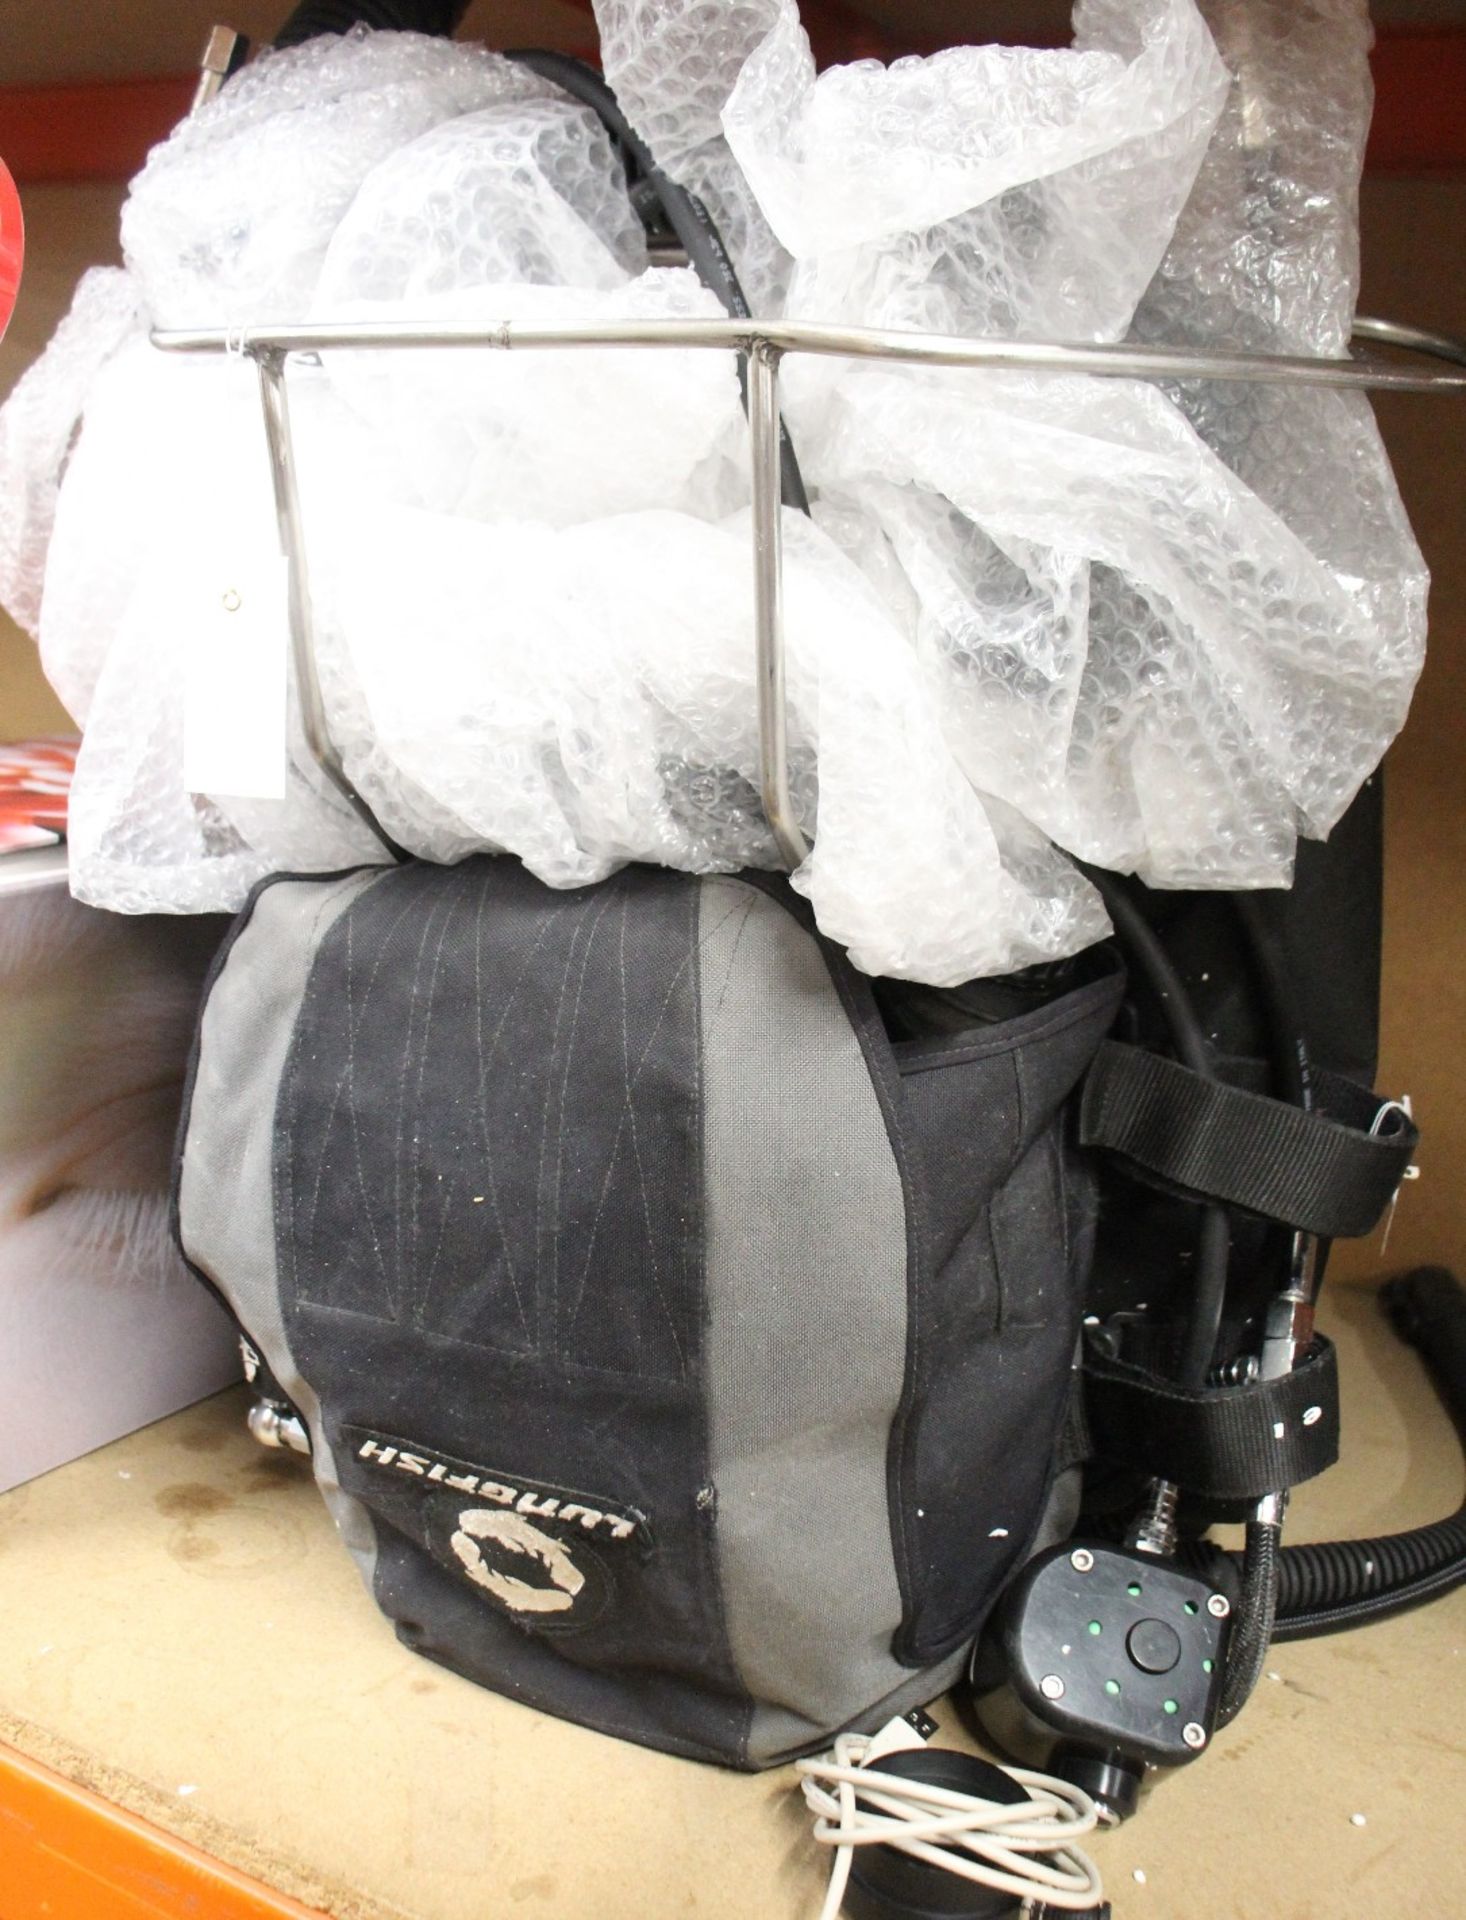 A pre-owned Lungfish Compact Rebreather (Item may be incomplete, viewing recommended).